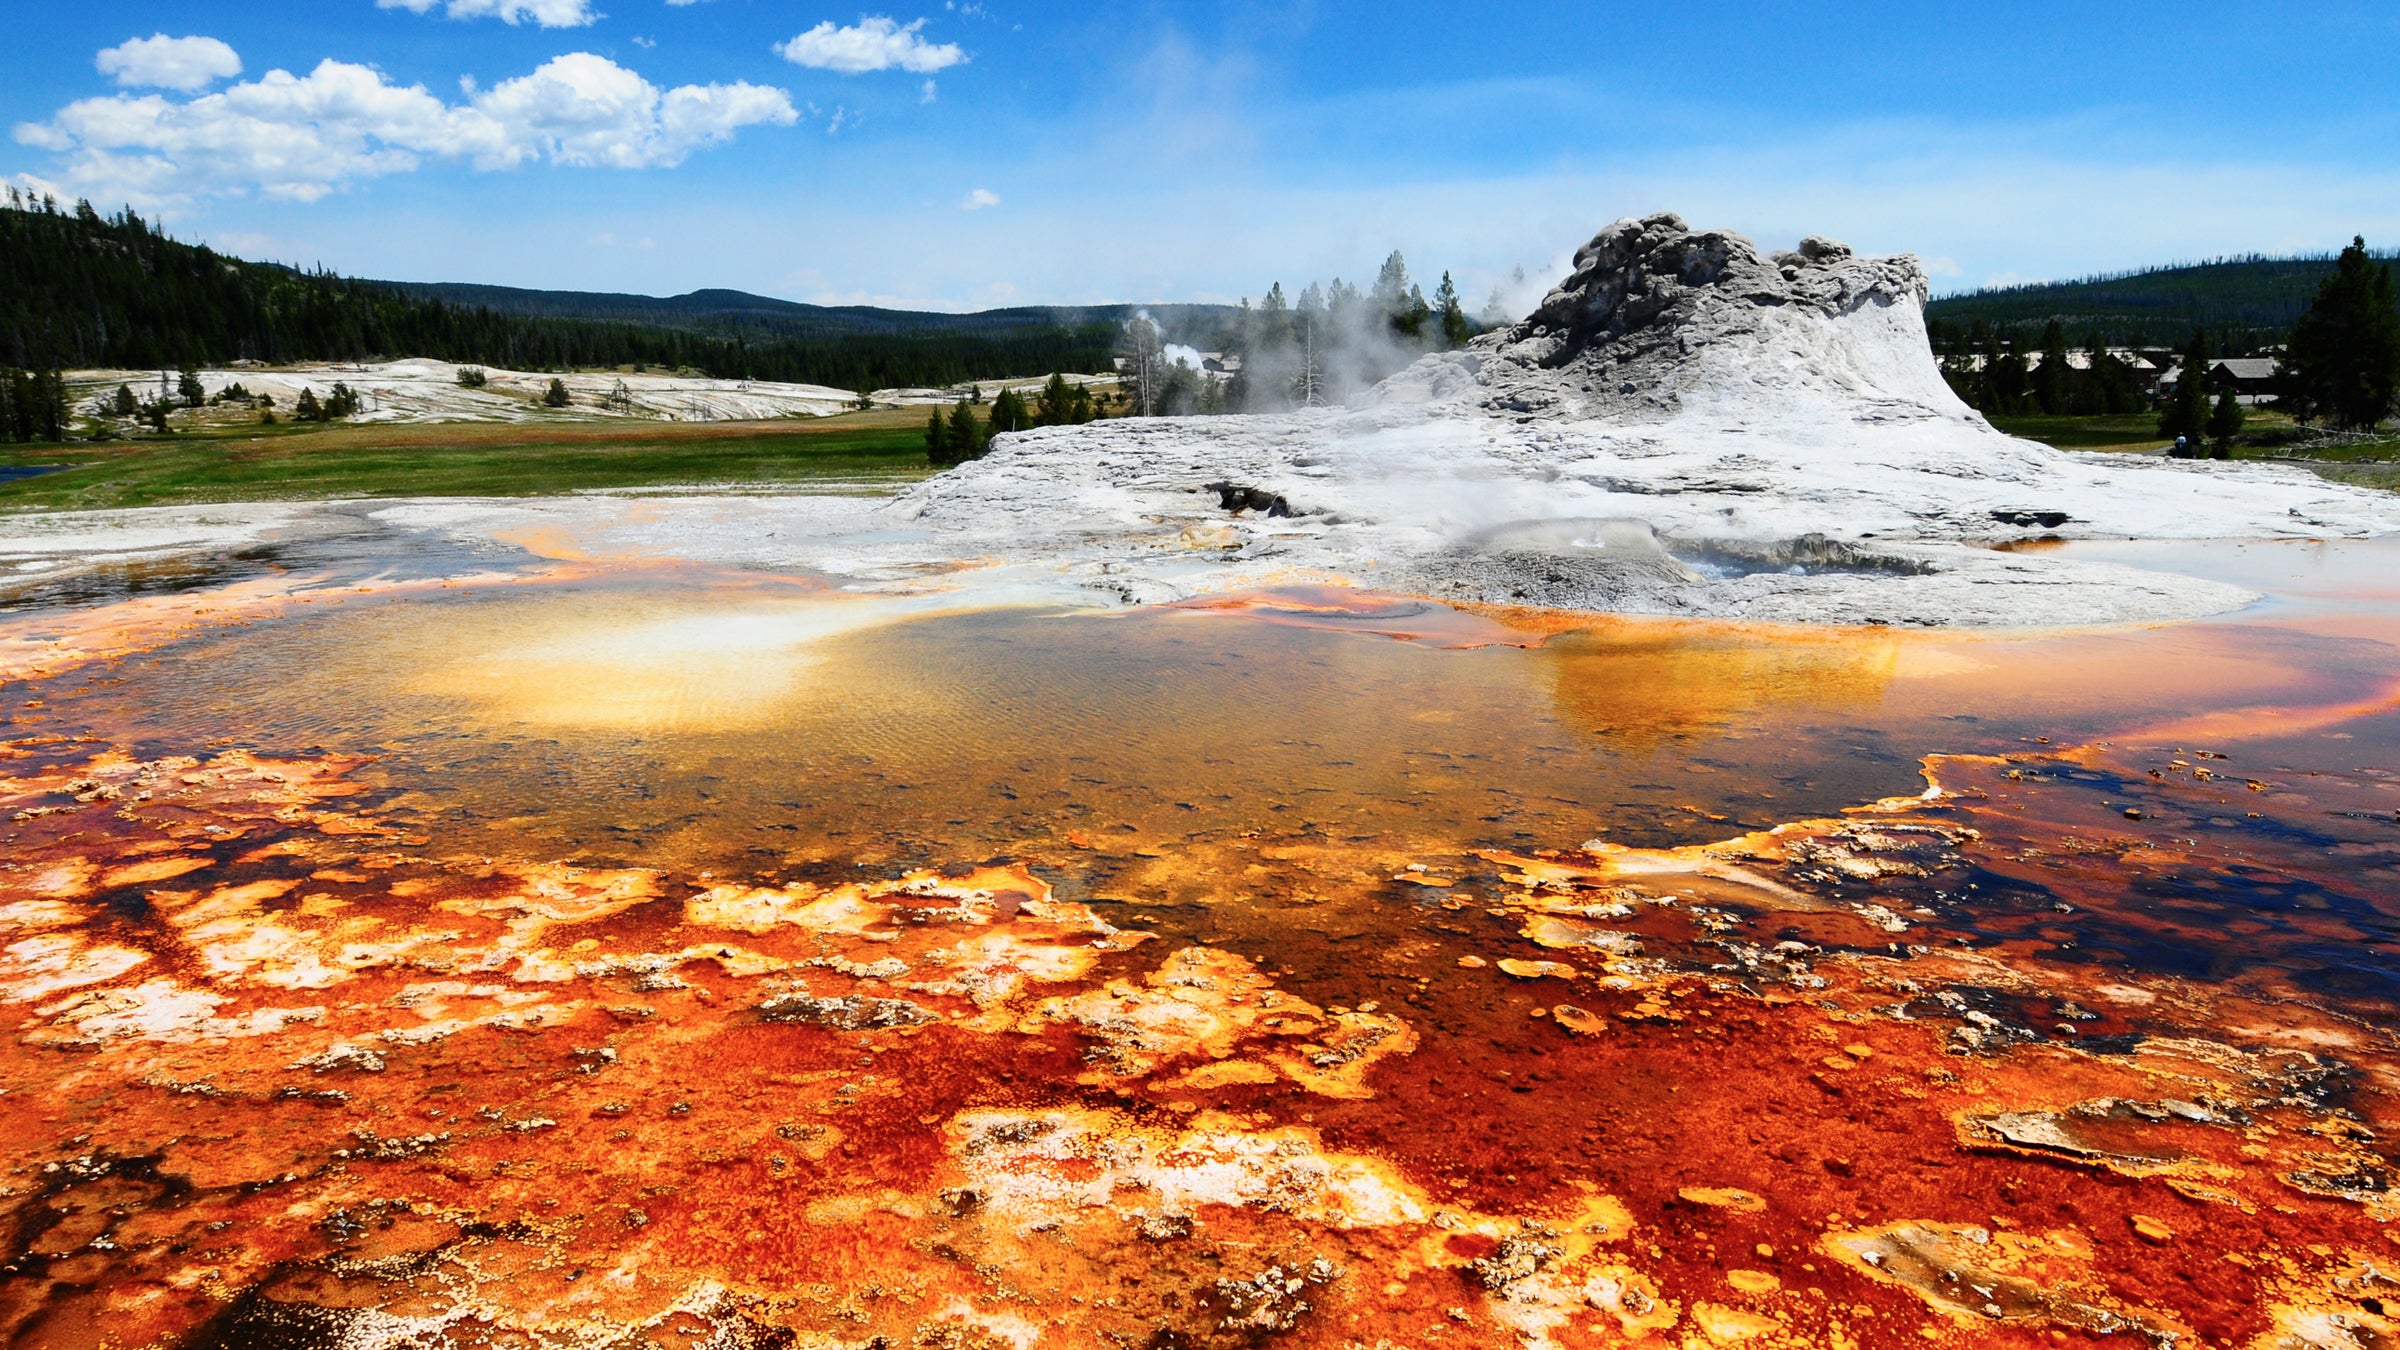 A Brief History of Deaths in Yellowstone's Hot Springs